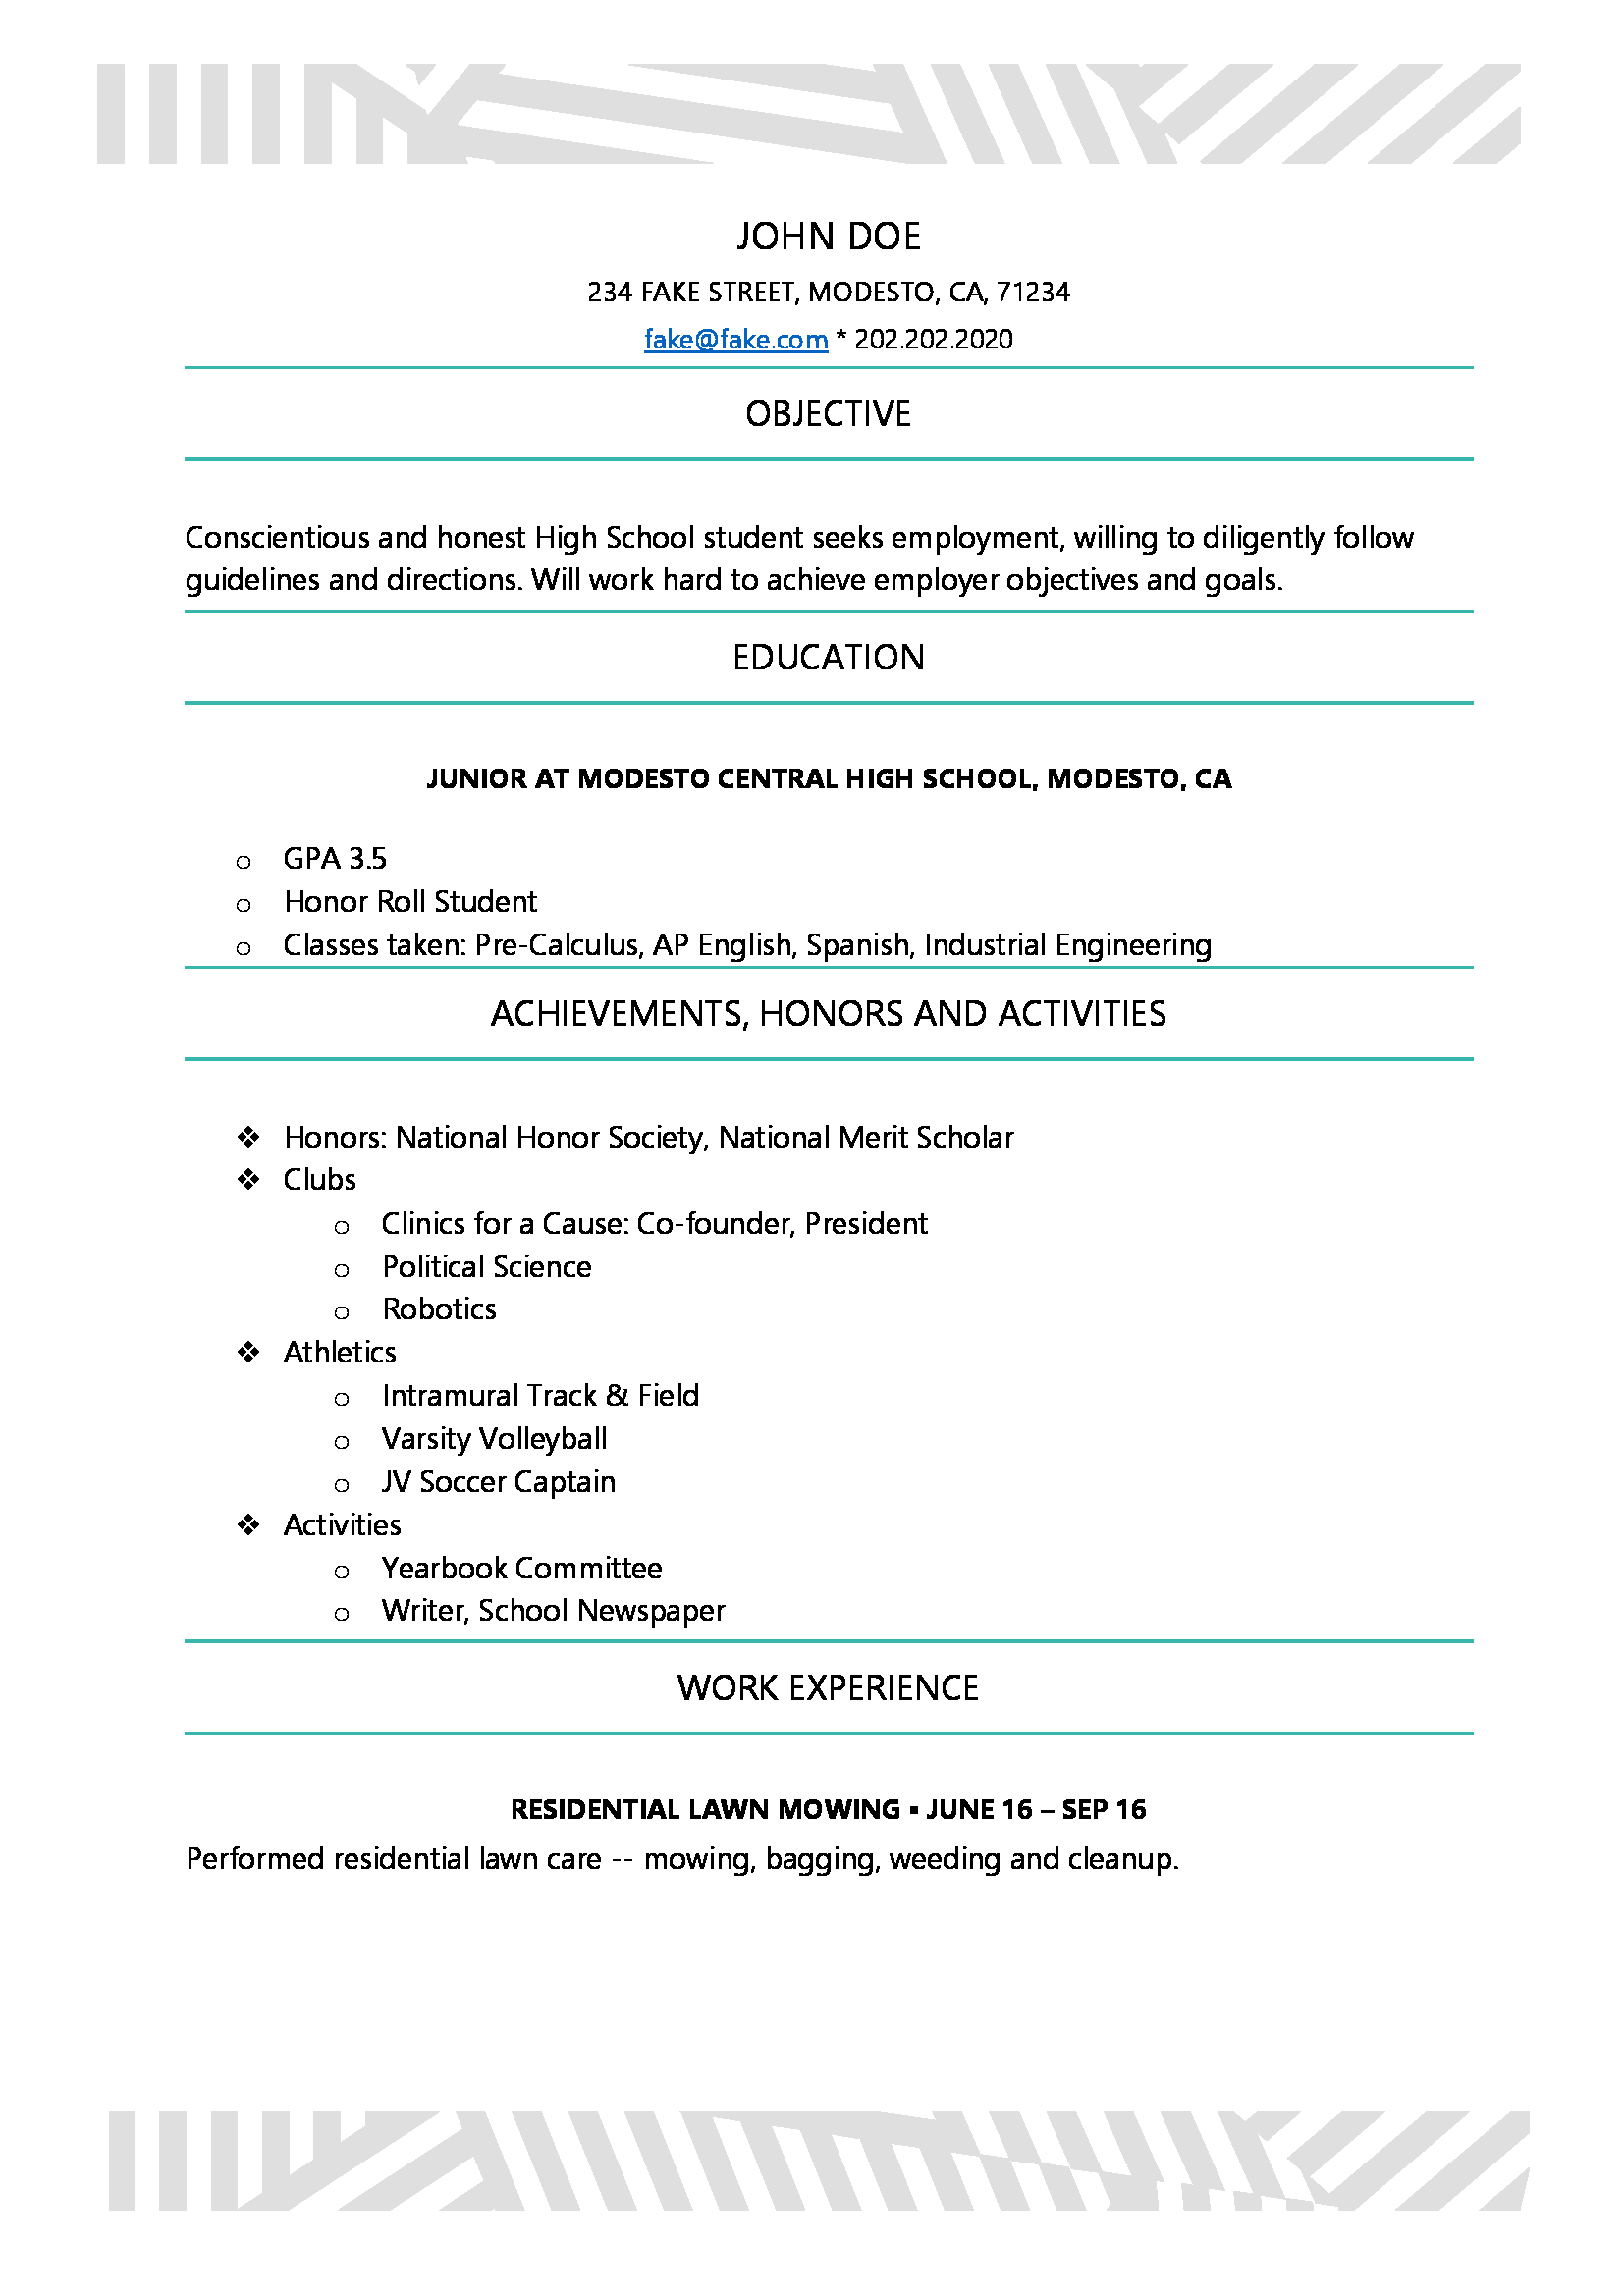 Resume For High School Student 0a13cadf 7620 4dd6 8951 4a85d15900f9 resume for high school student|wikiresume.com